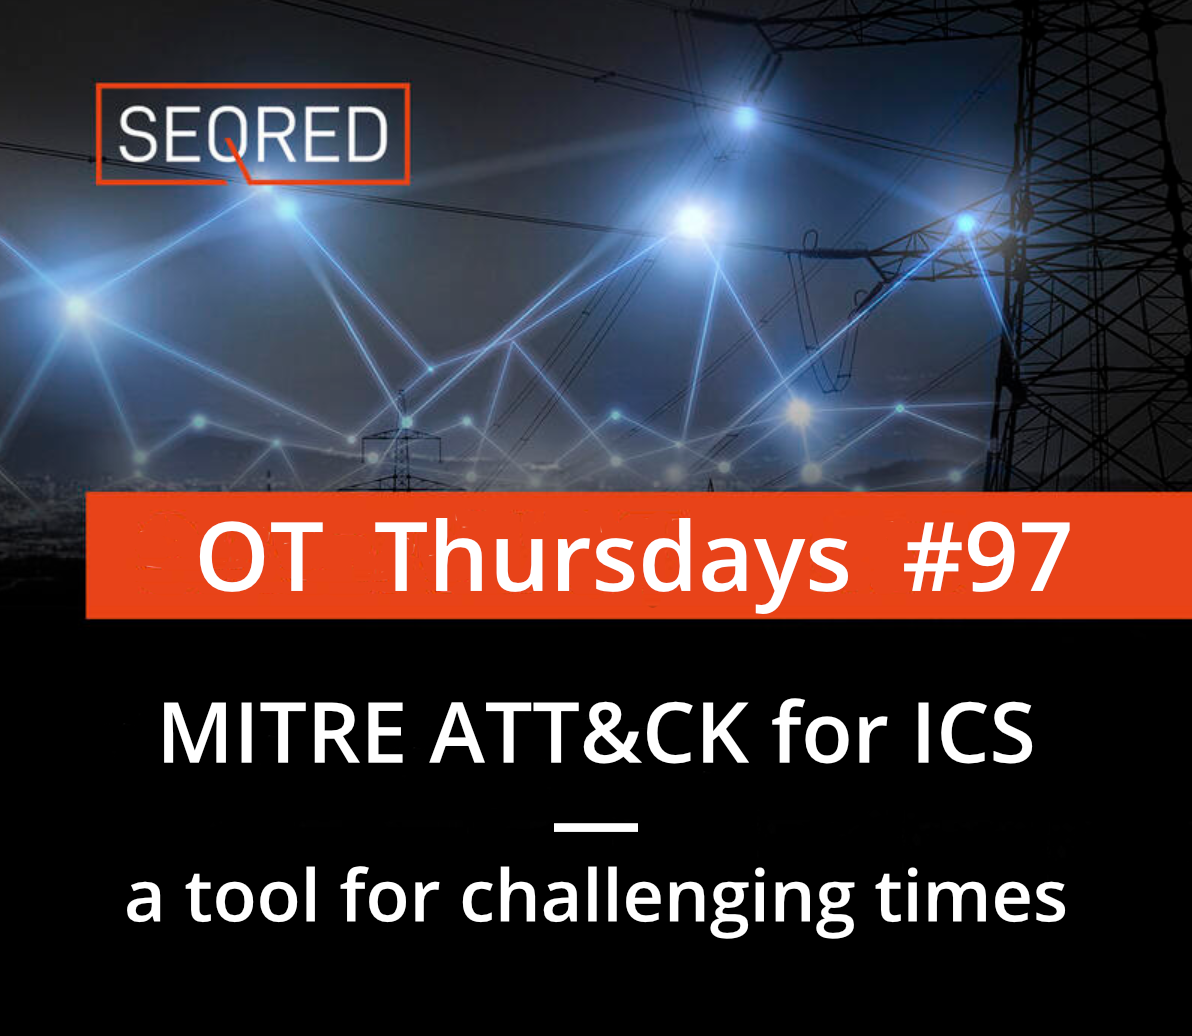 MITRE ATT&CK for ICS - a tool for challenging times